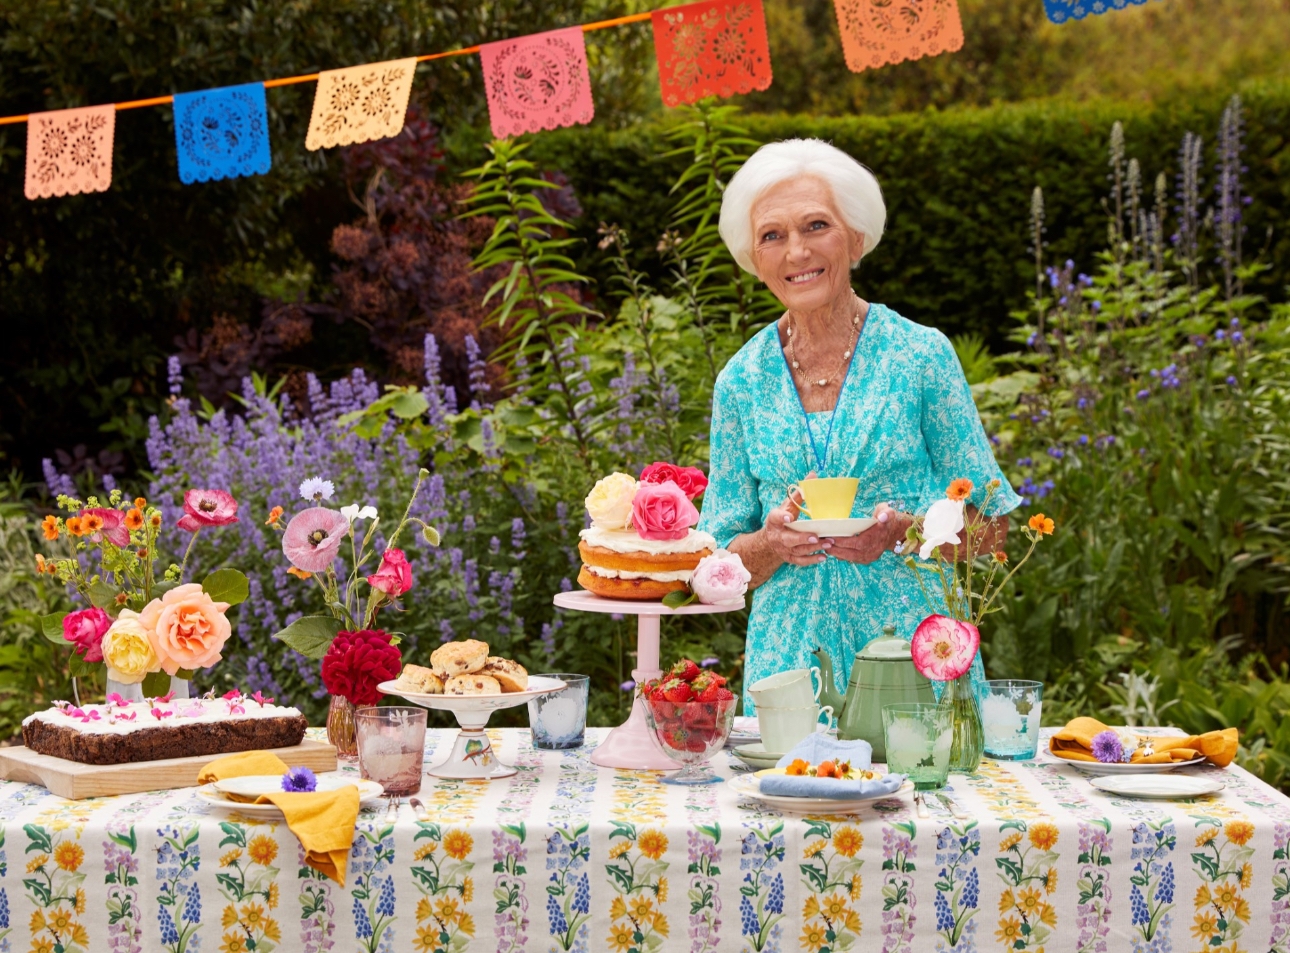 Mary Berry promoting the Great British Garden Party this summer